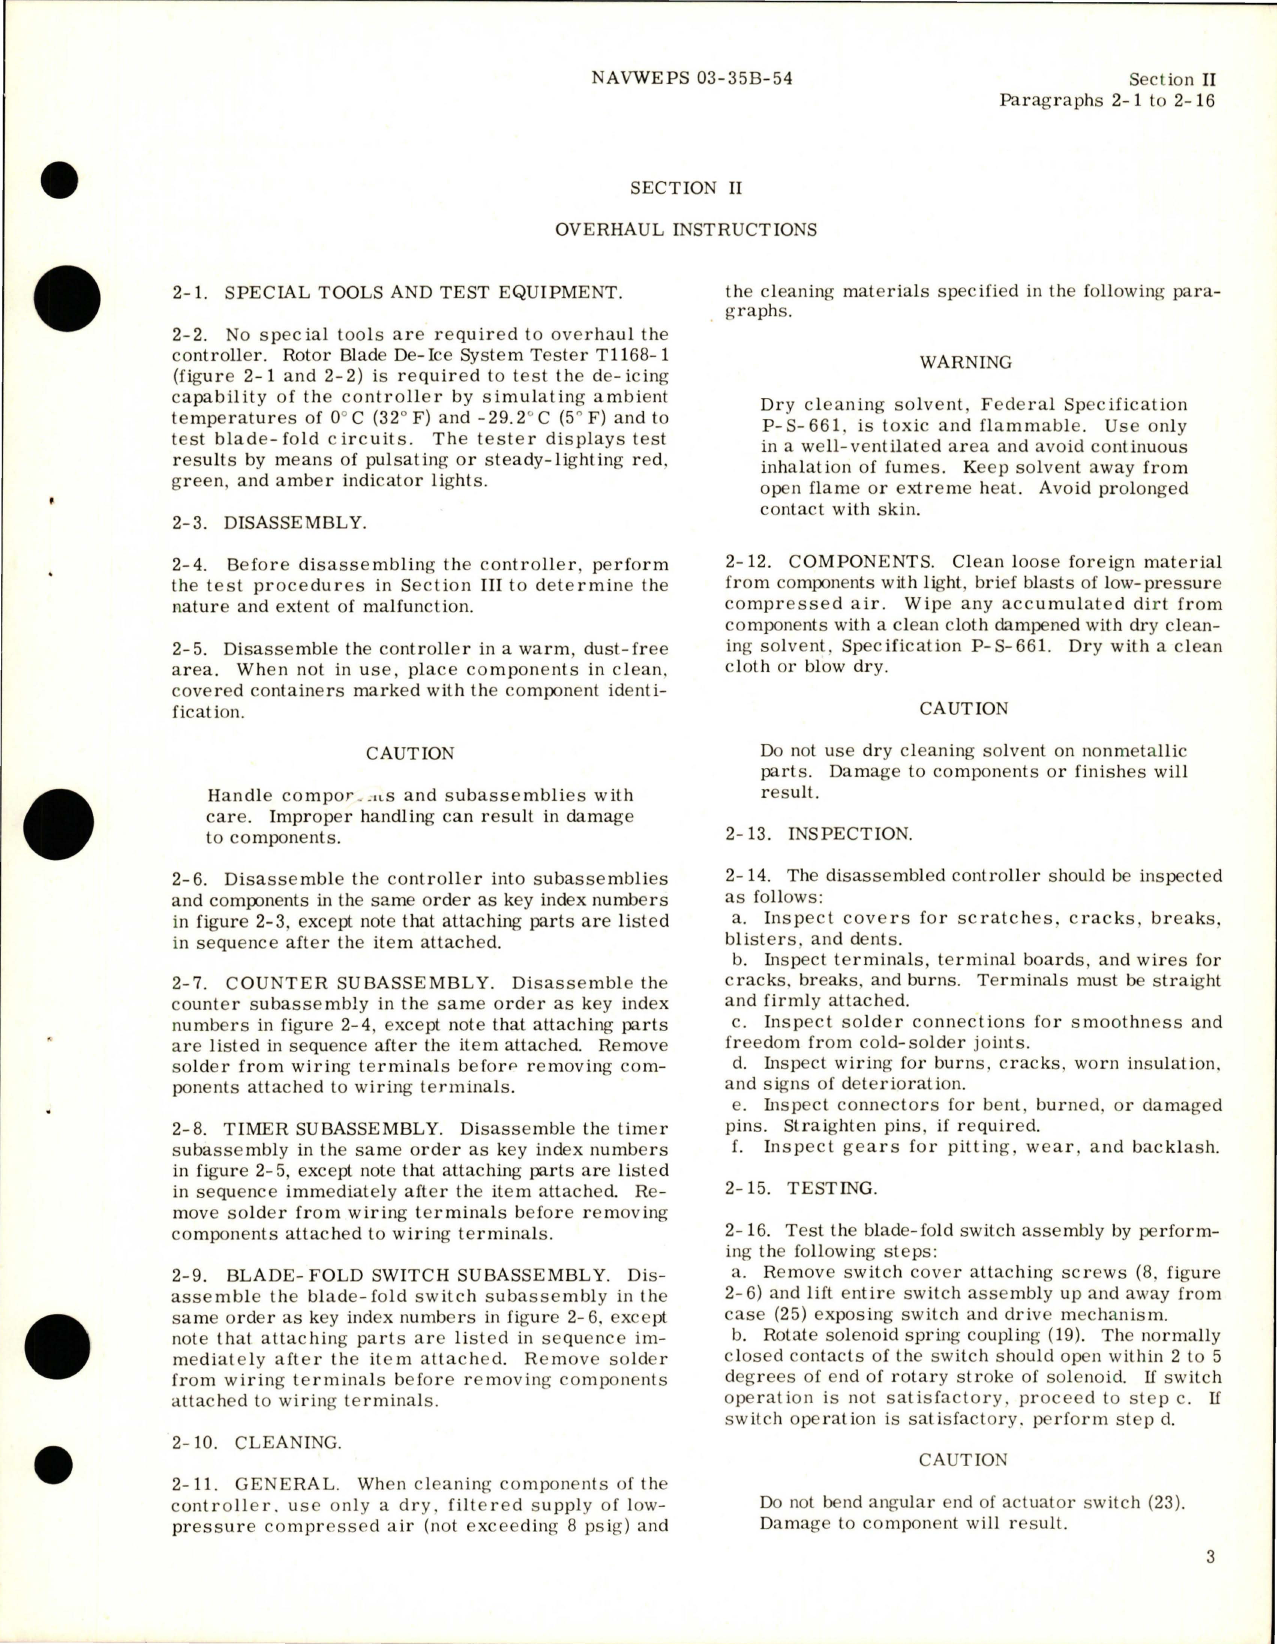 Sample page 5 from AirCorps Library document: Overhaul Instructions for Master De-Icing Controller - Part A628-1A